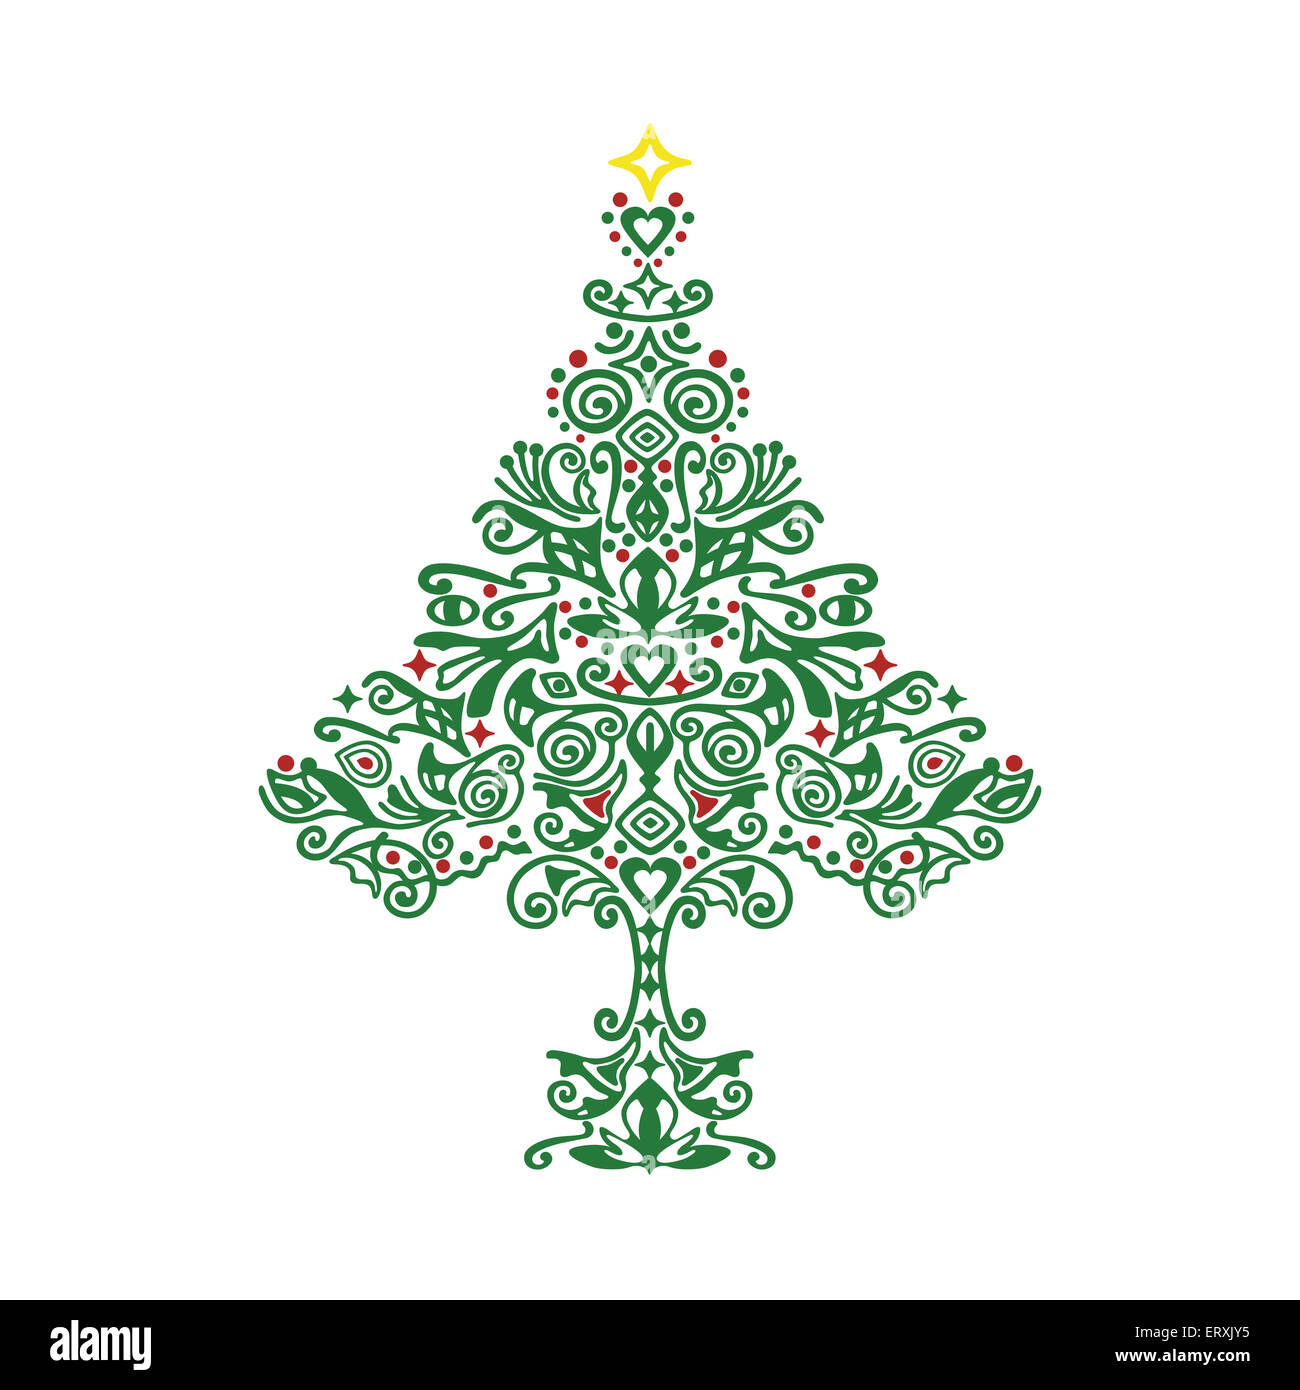 Green Christmas Tree ornament with a detailed hand drawn Pattern Stock Photo